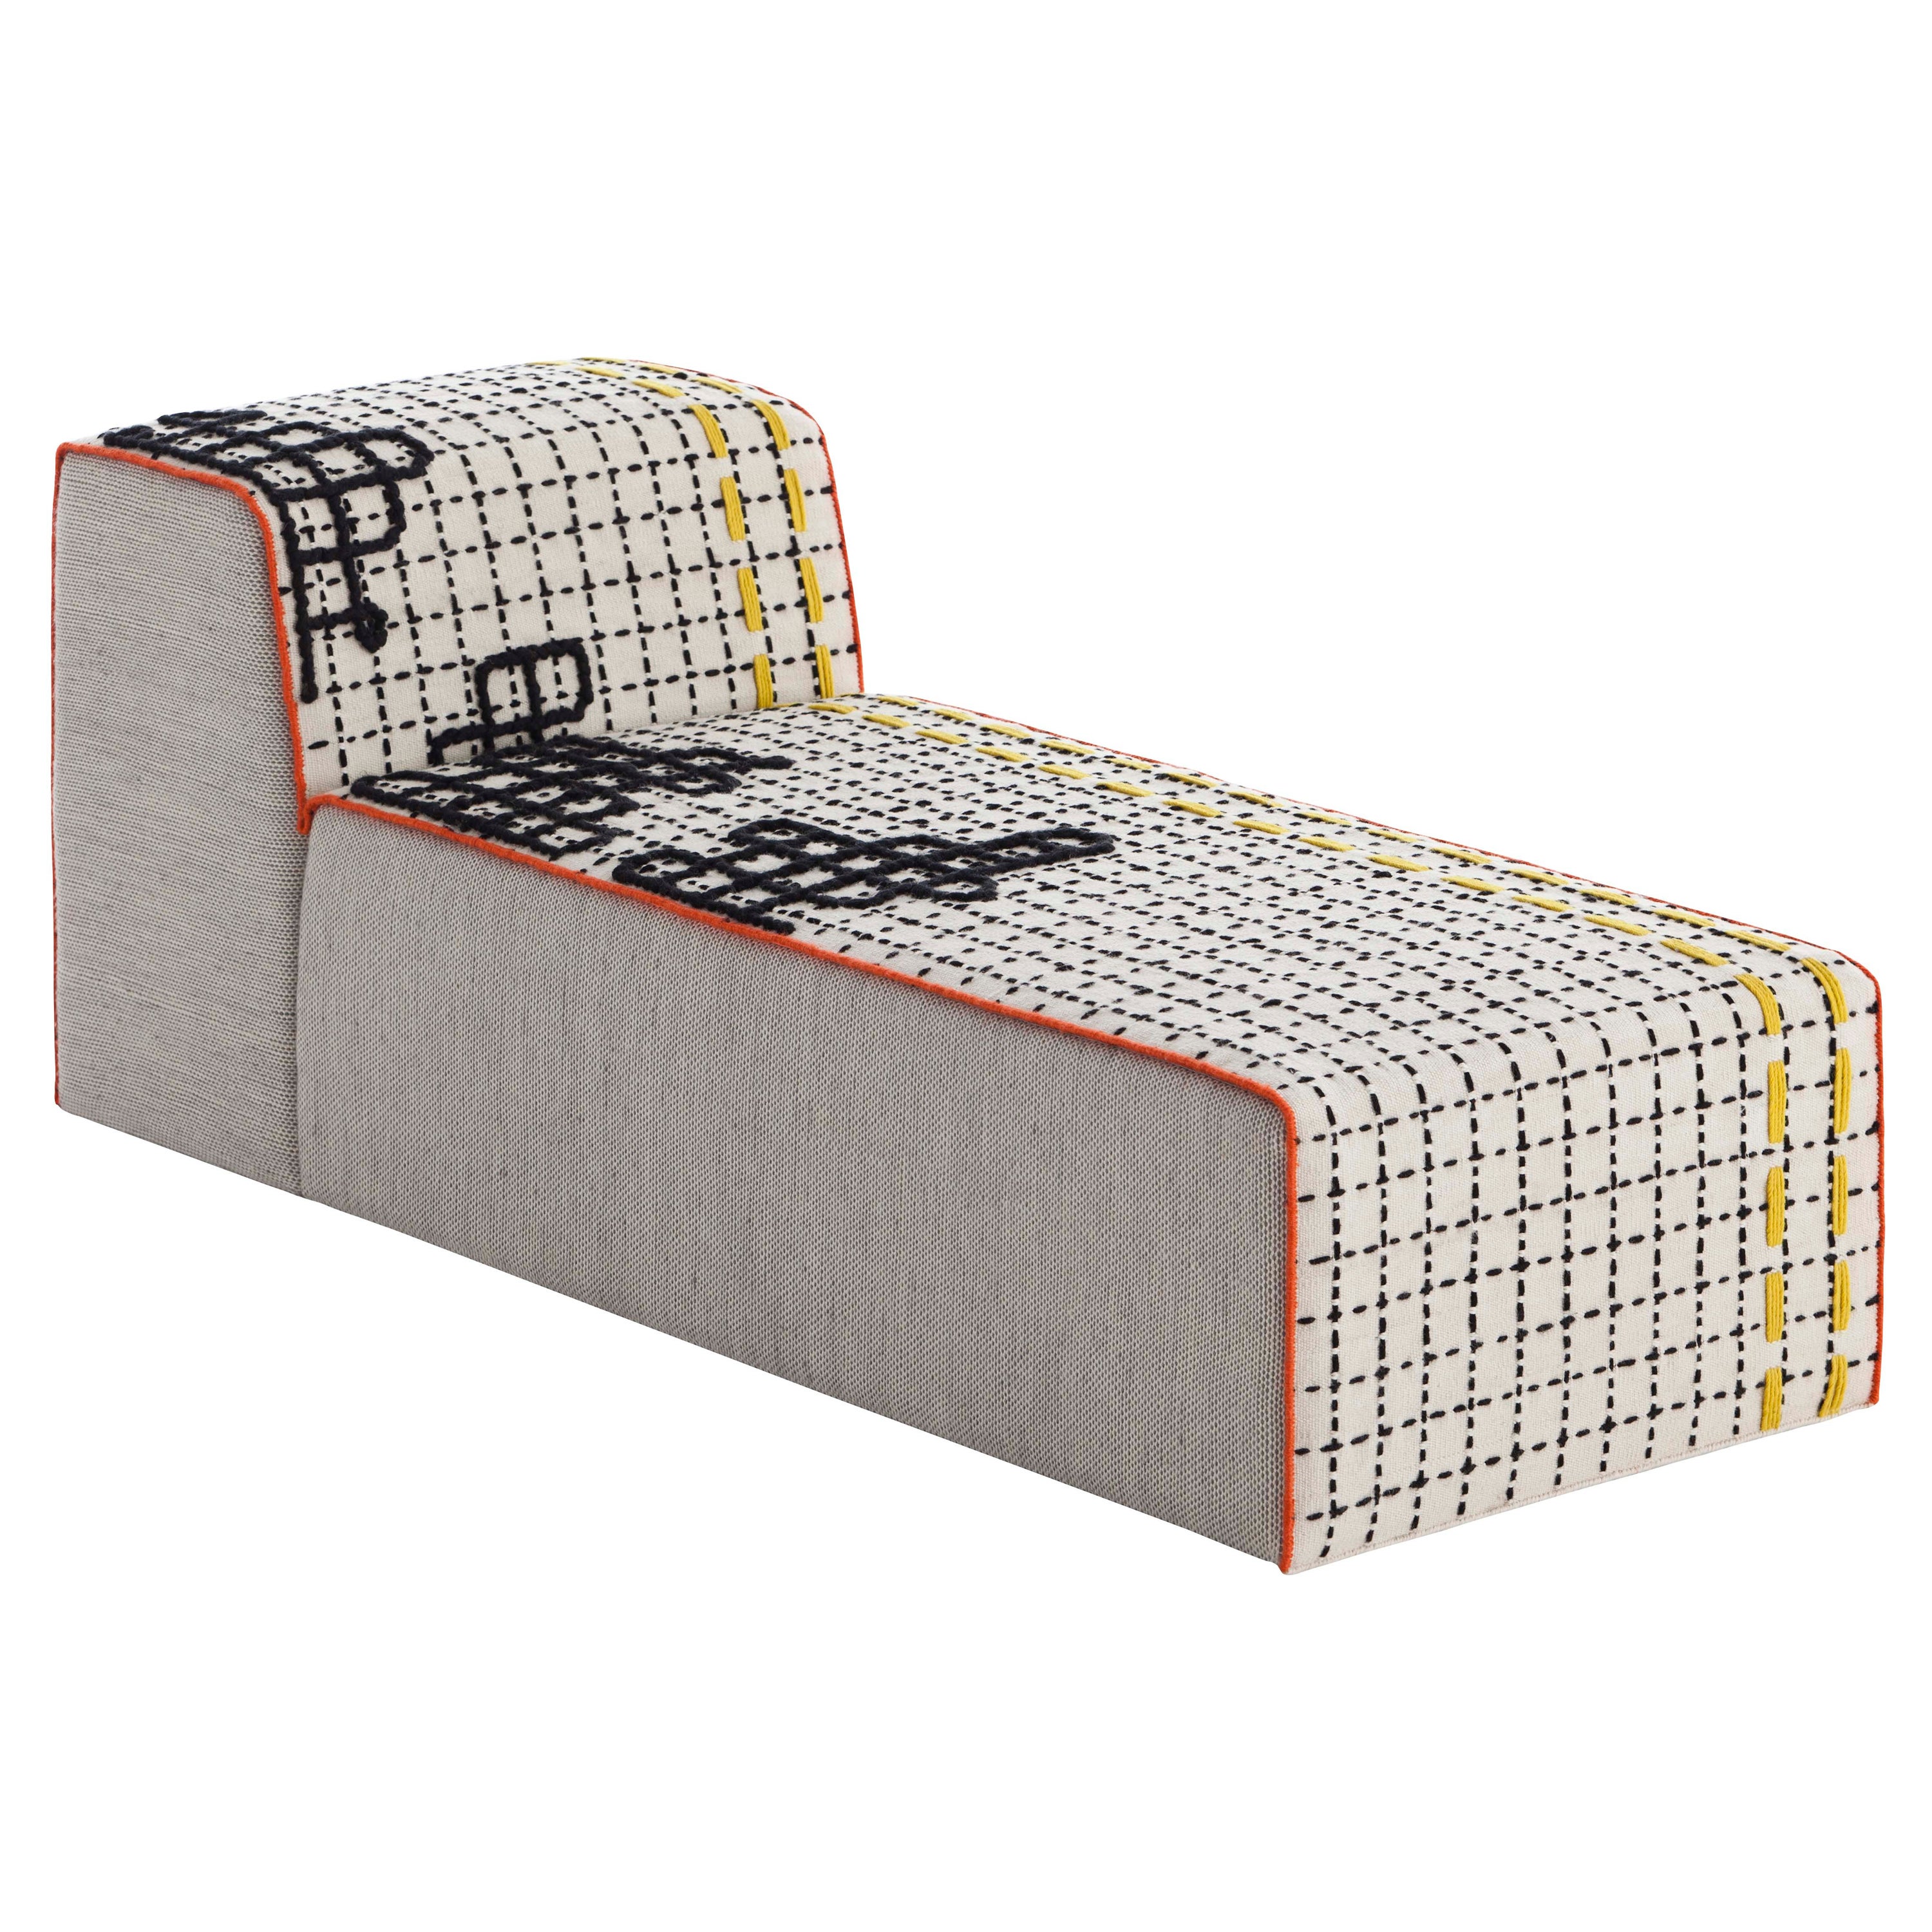 GAN Spaces Bandas Chaise Longue in D White with Wood Frame by Patricia Urquiola For Sale